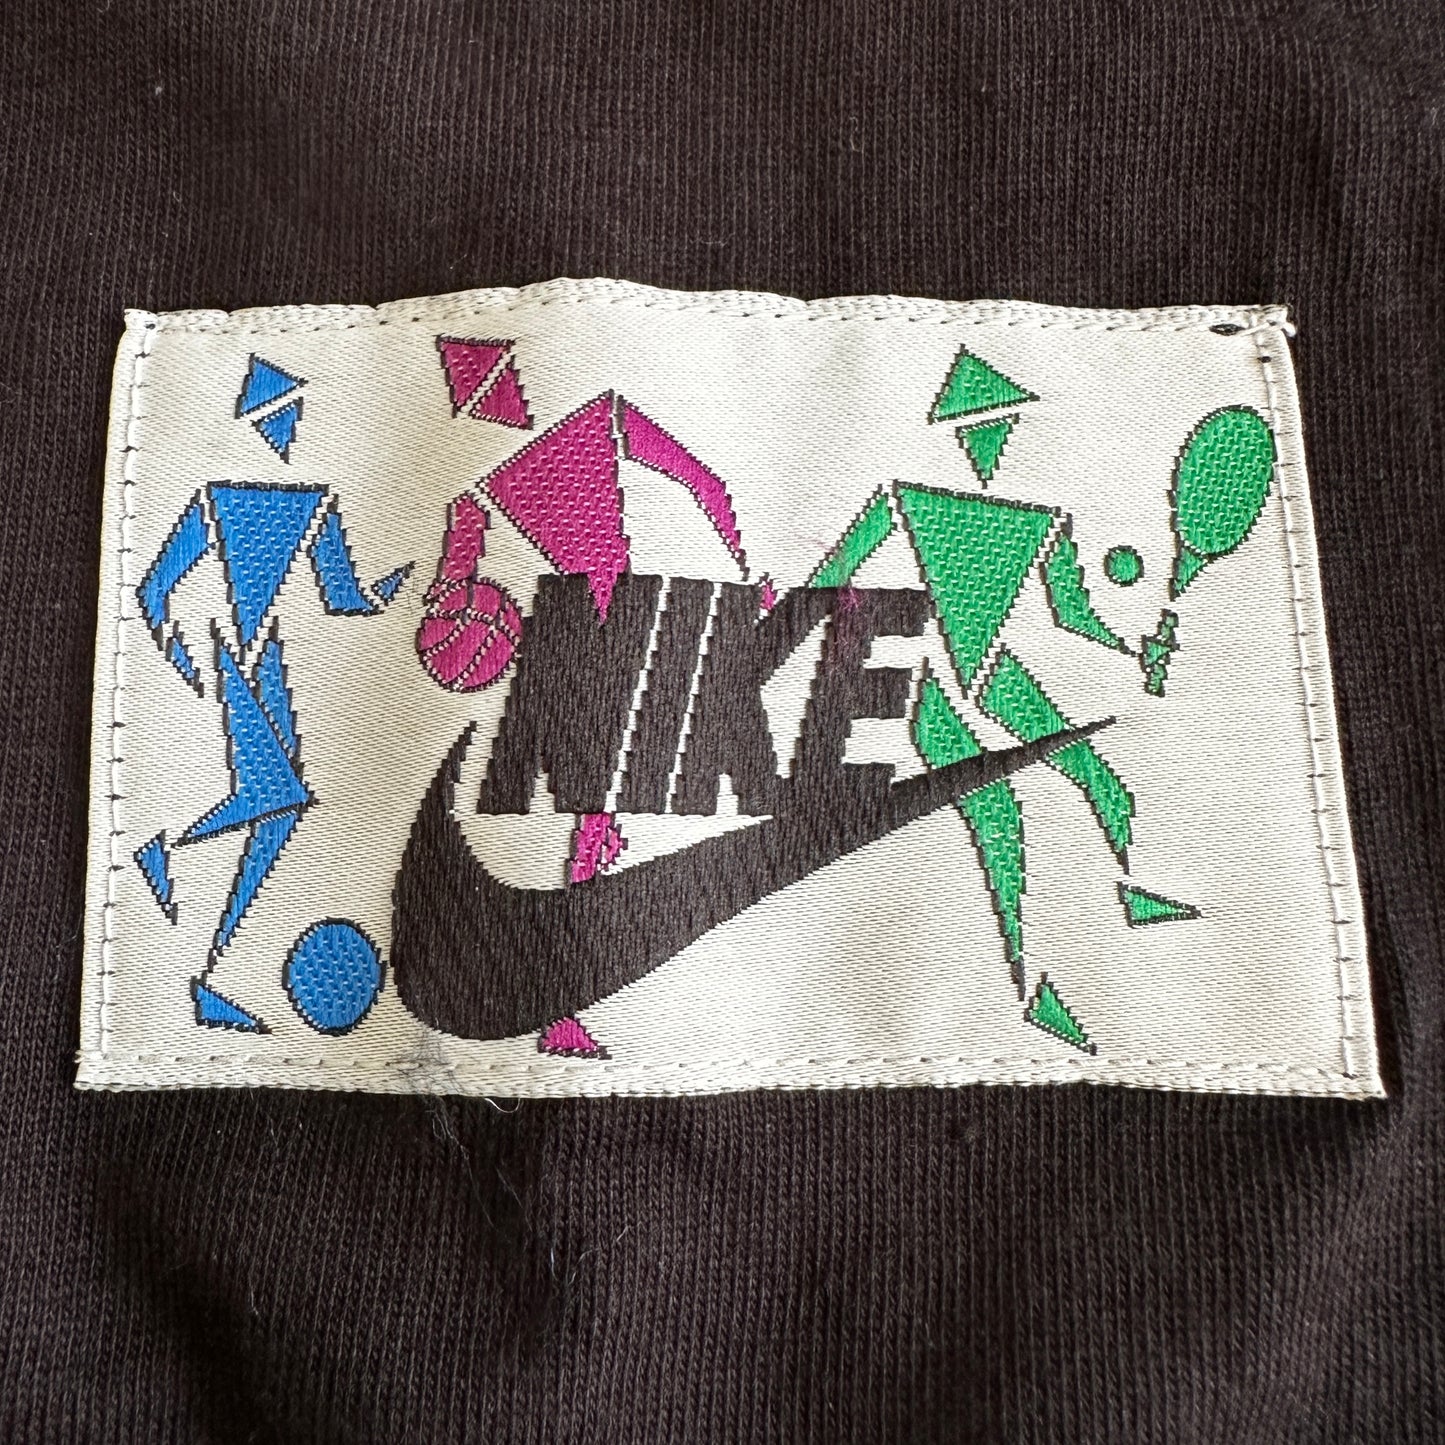 Nike 1989 Vintage Sports Boatneck Sample T-Shirt - L - Made in Italy